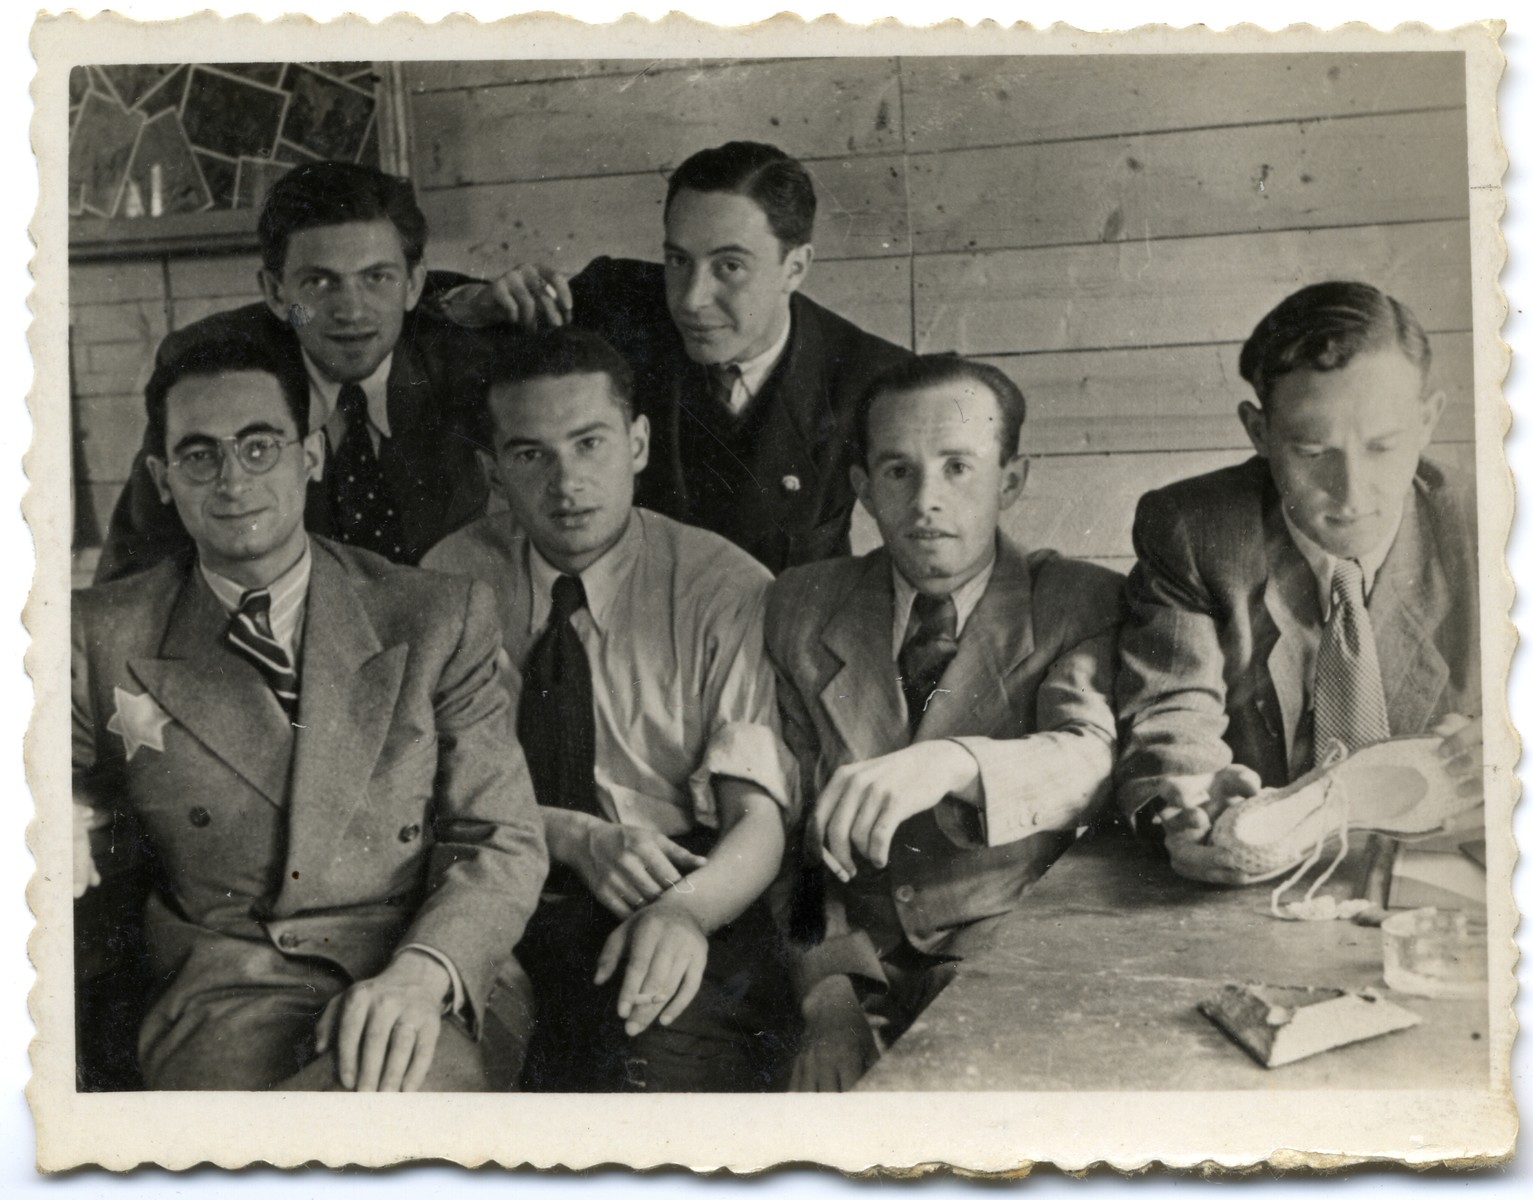 Group portrait of employees of the leather workshop in the Lodz ghetto.

Among those pictured is Leon Fajtlowicz (front, left).  He was the uncle of the donor and in charge of all the leather workshops in the ghetto.